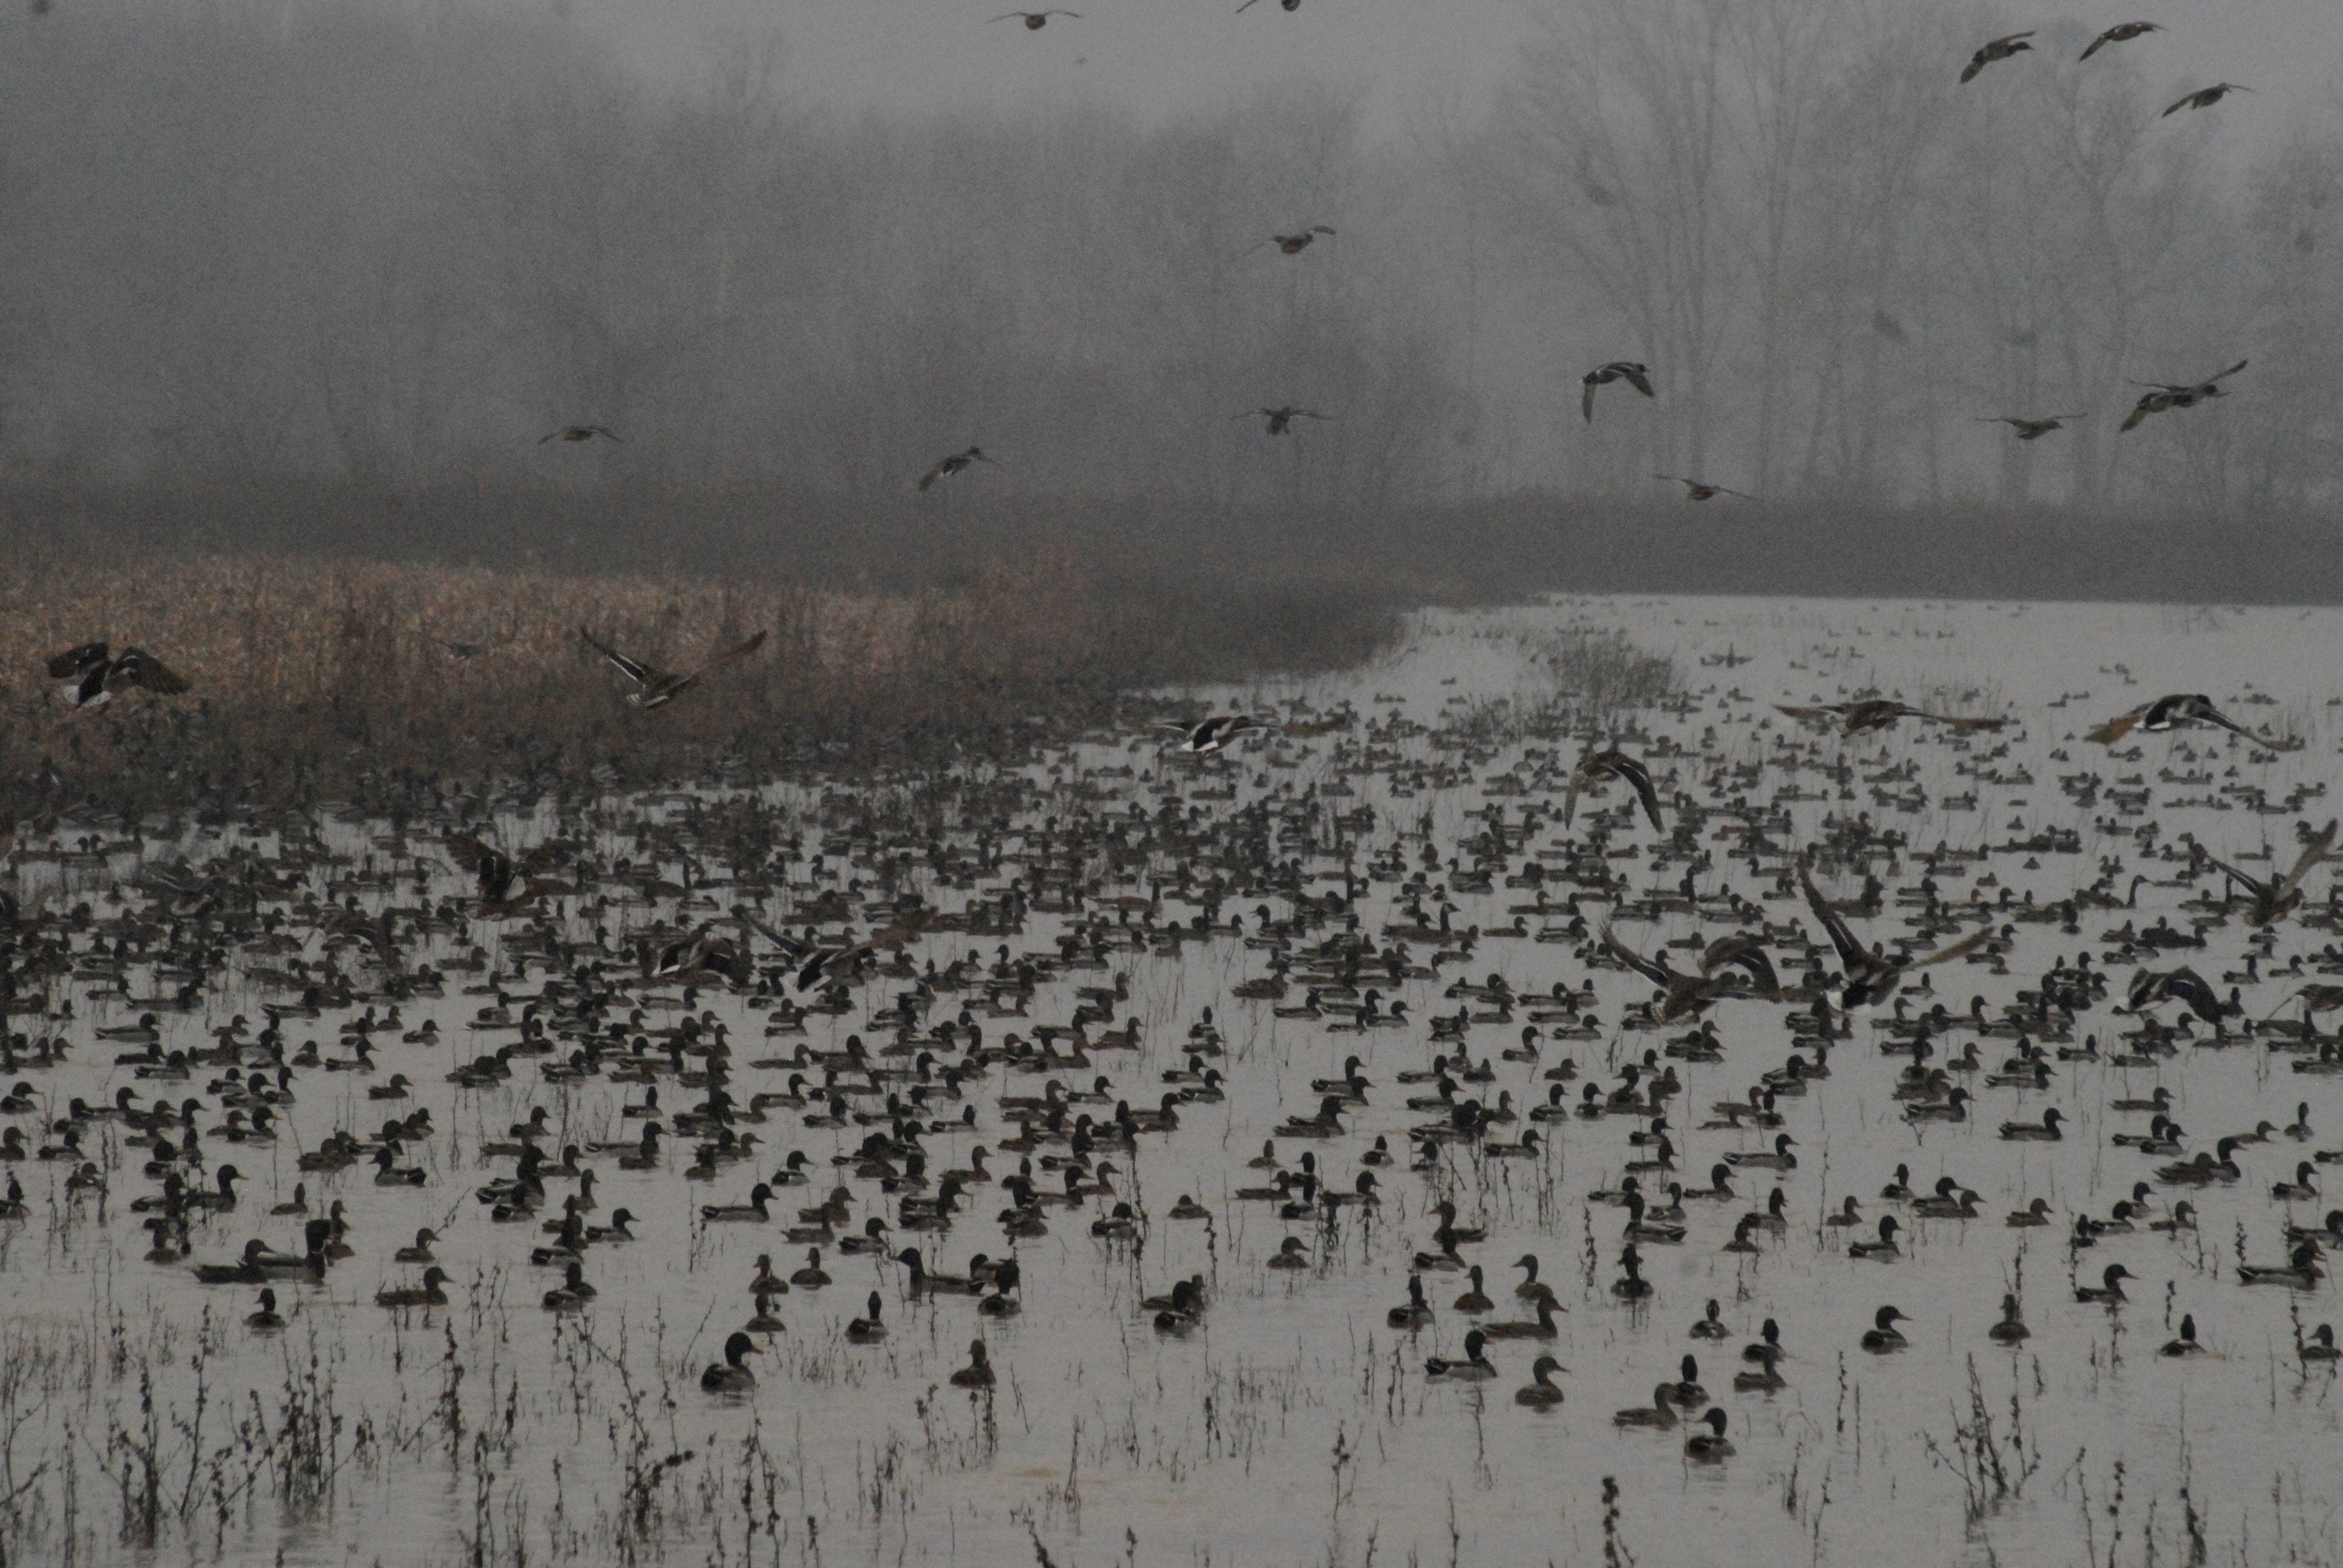 A large flock of ducks sitting in a wetland.